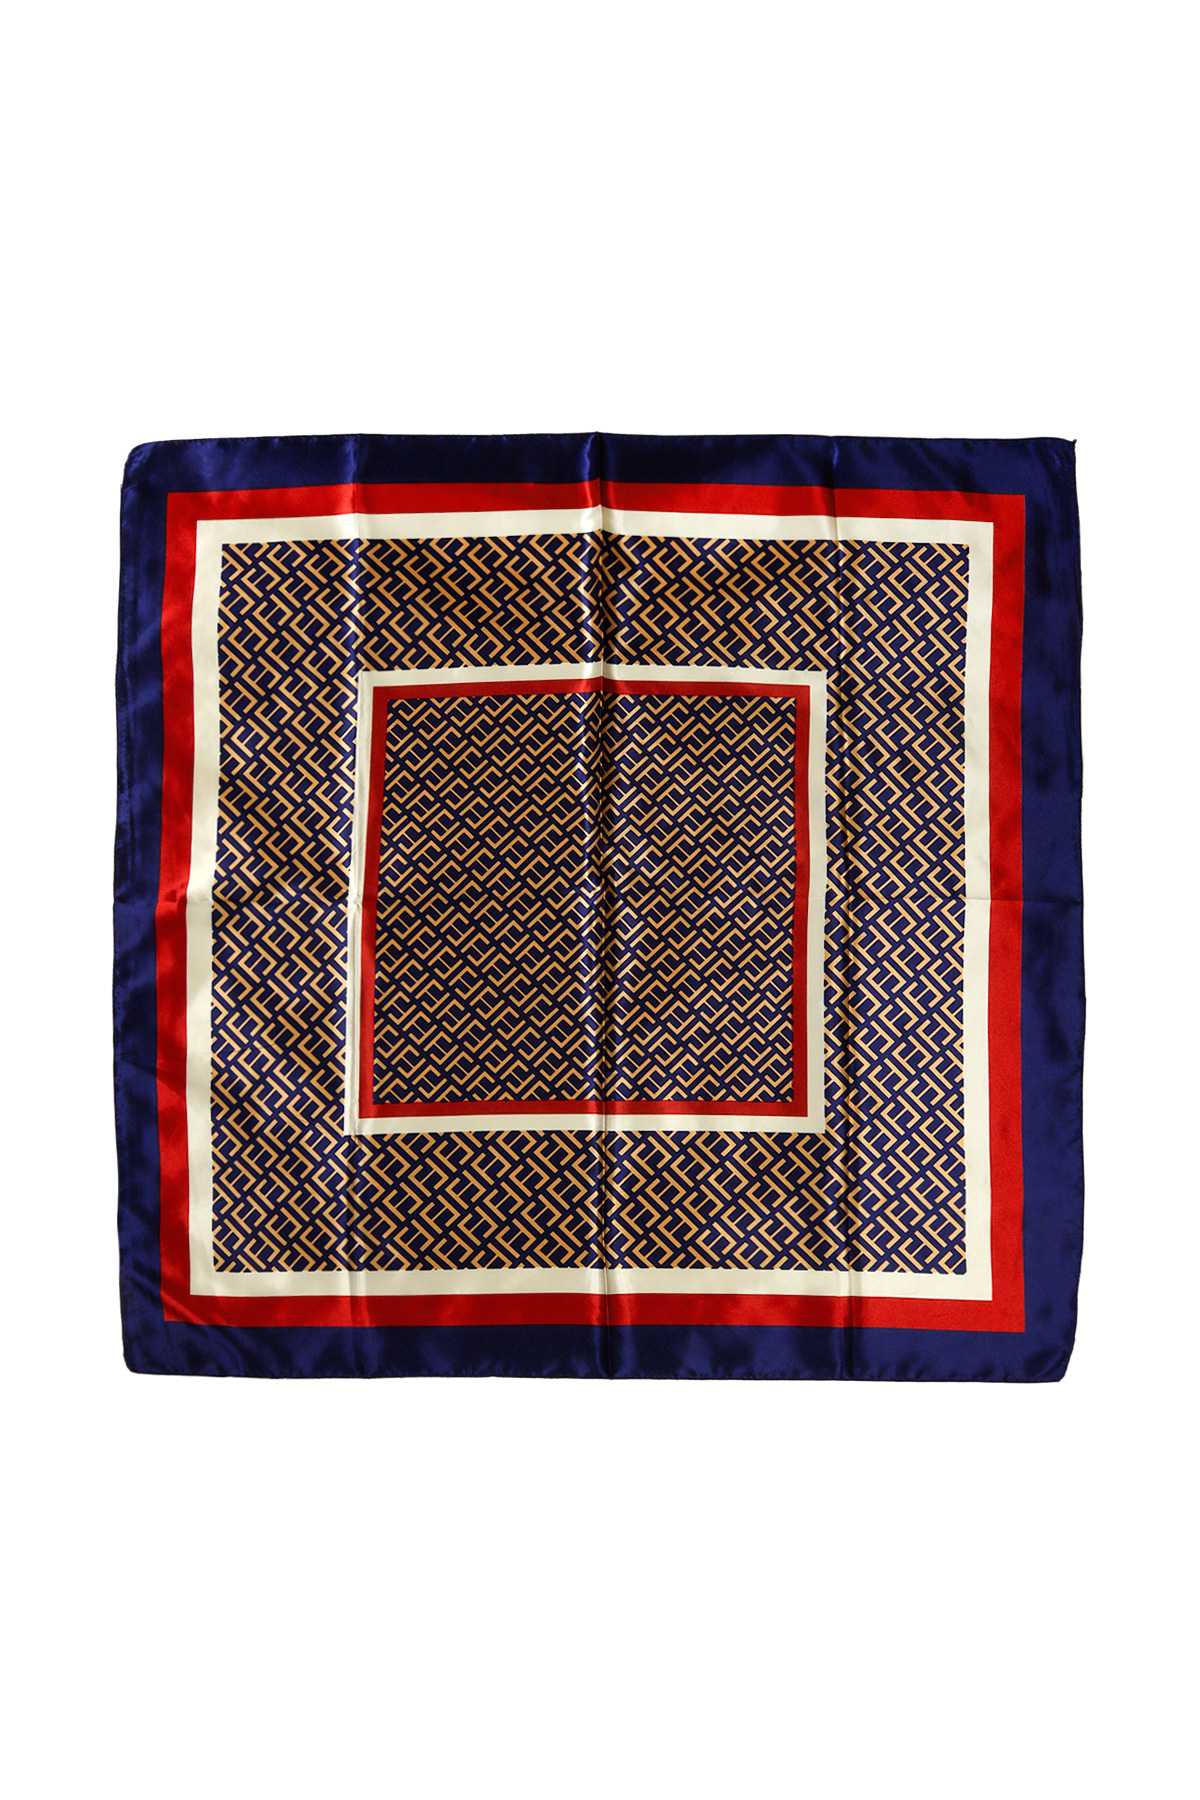 Greek and Square Scarf